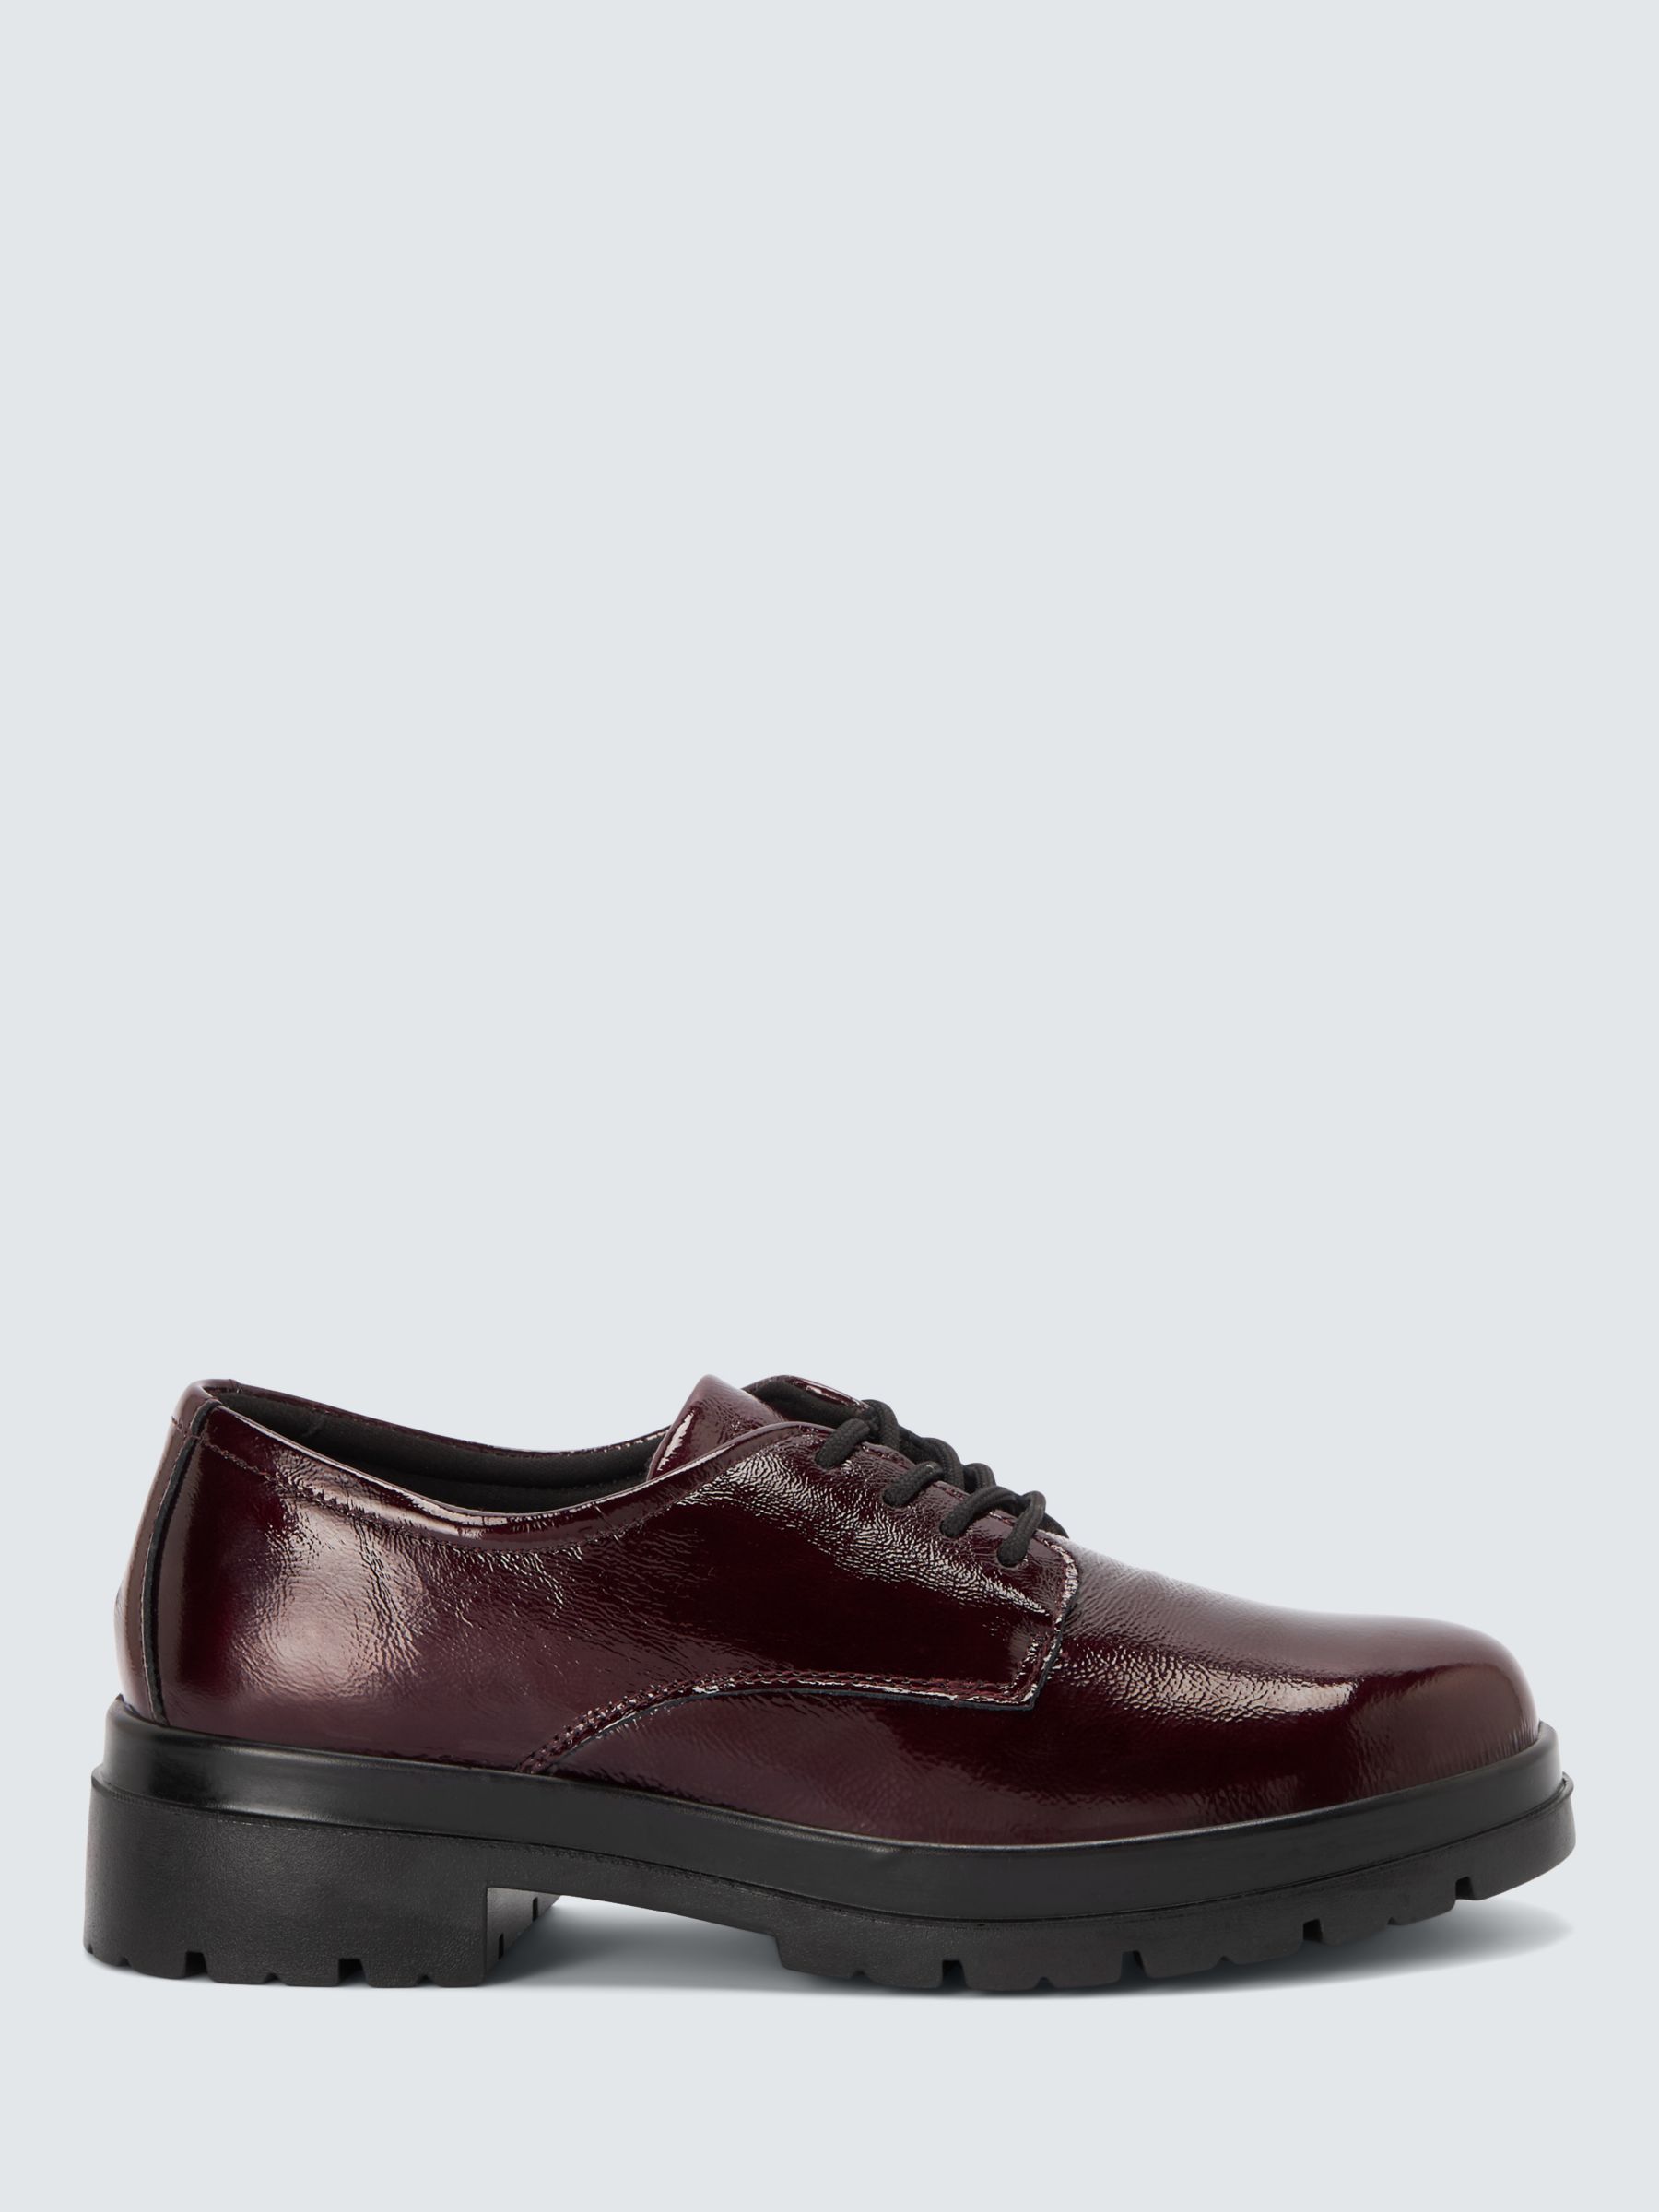 John Lewis Fifie Leather Comfort Lace Up Oxford Shoes, Burgundy at John ...